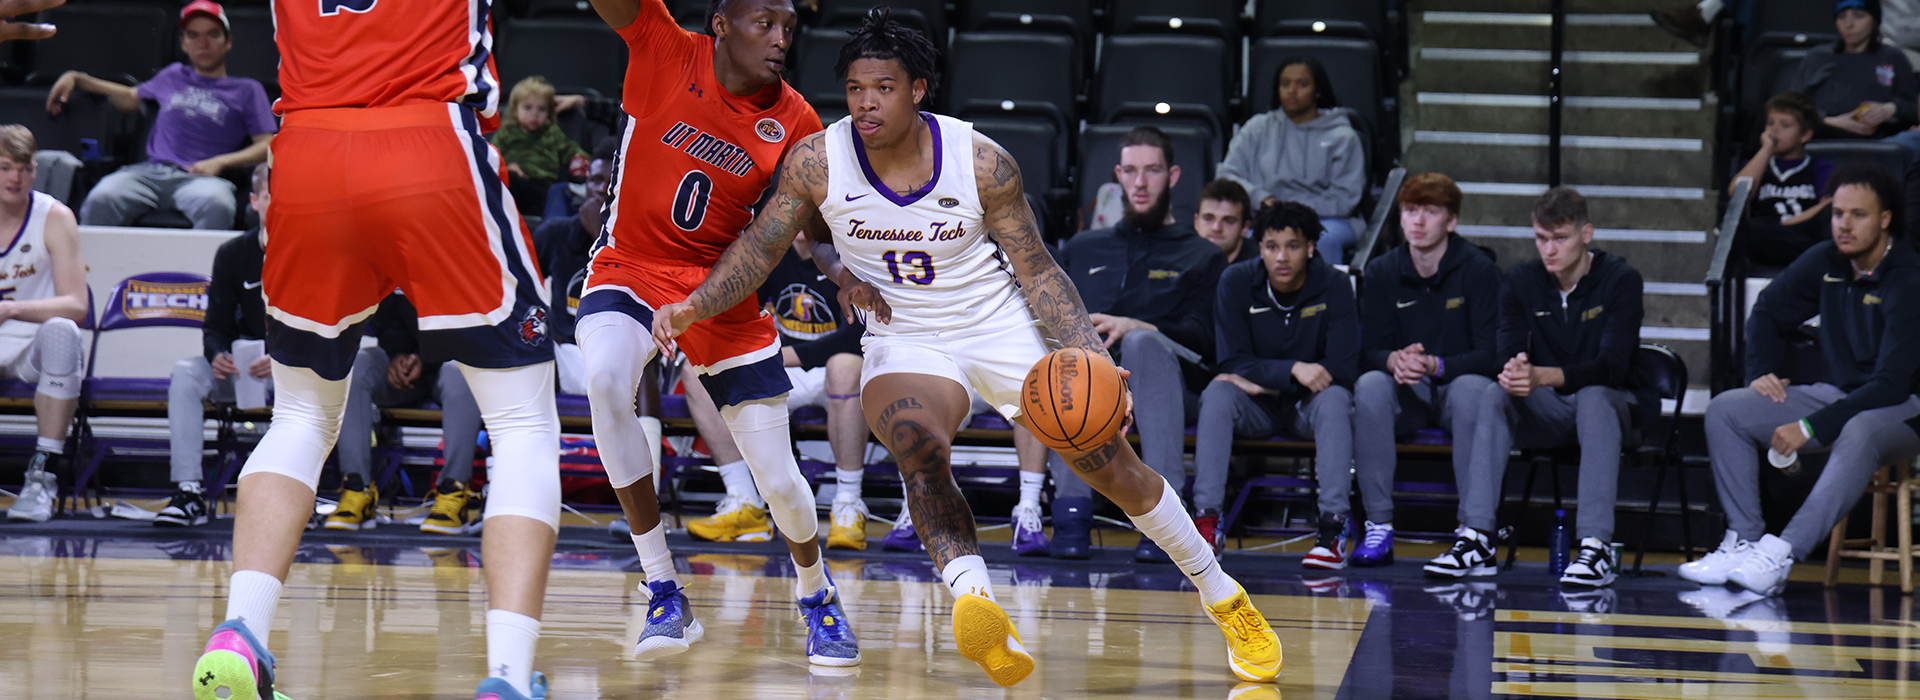 Tech falls to in-state rival UT Martin in Saturday OVC action